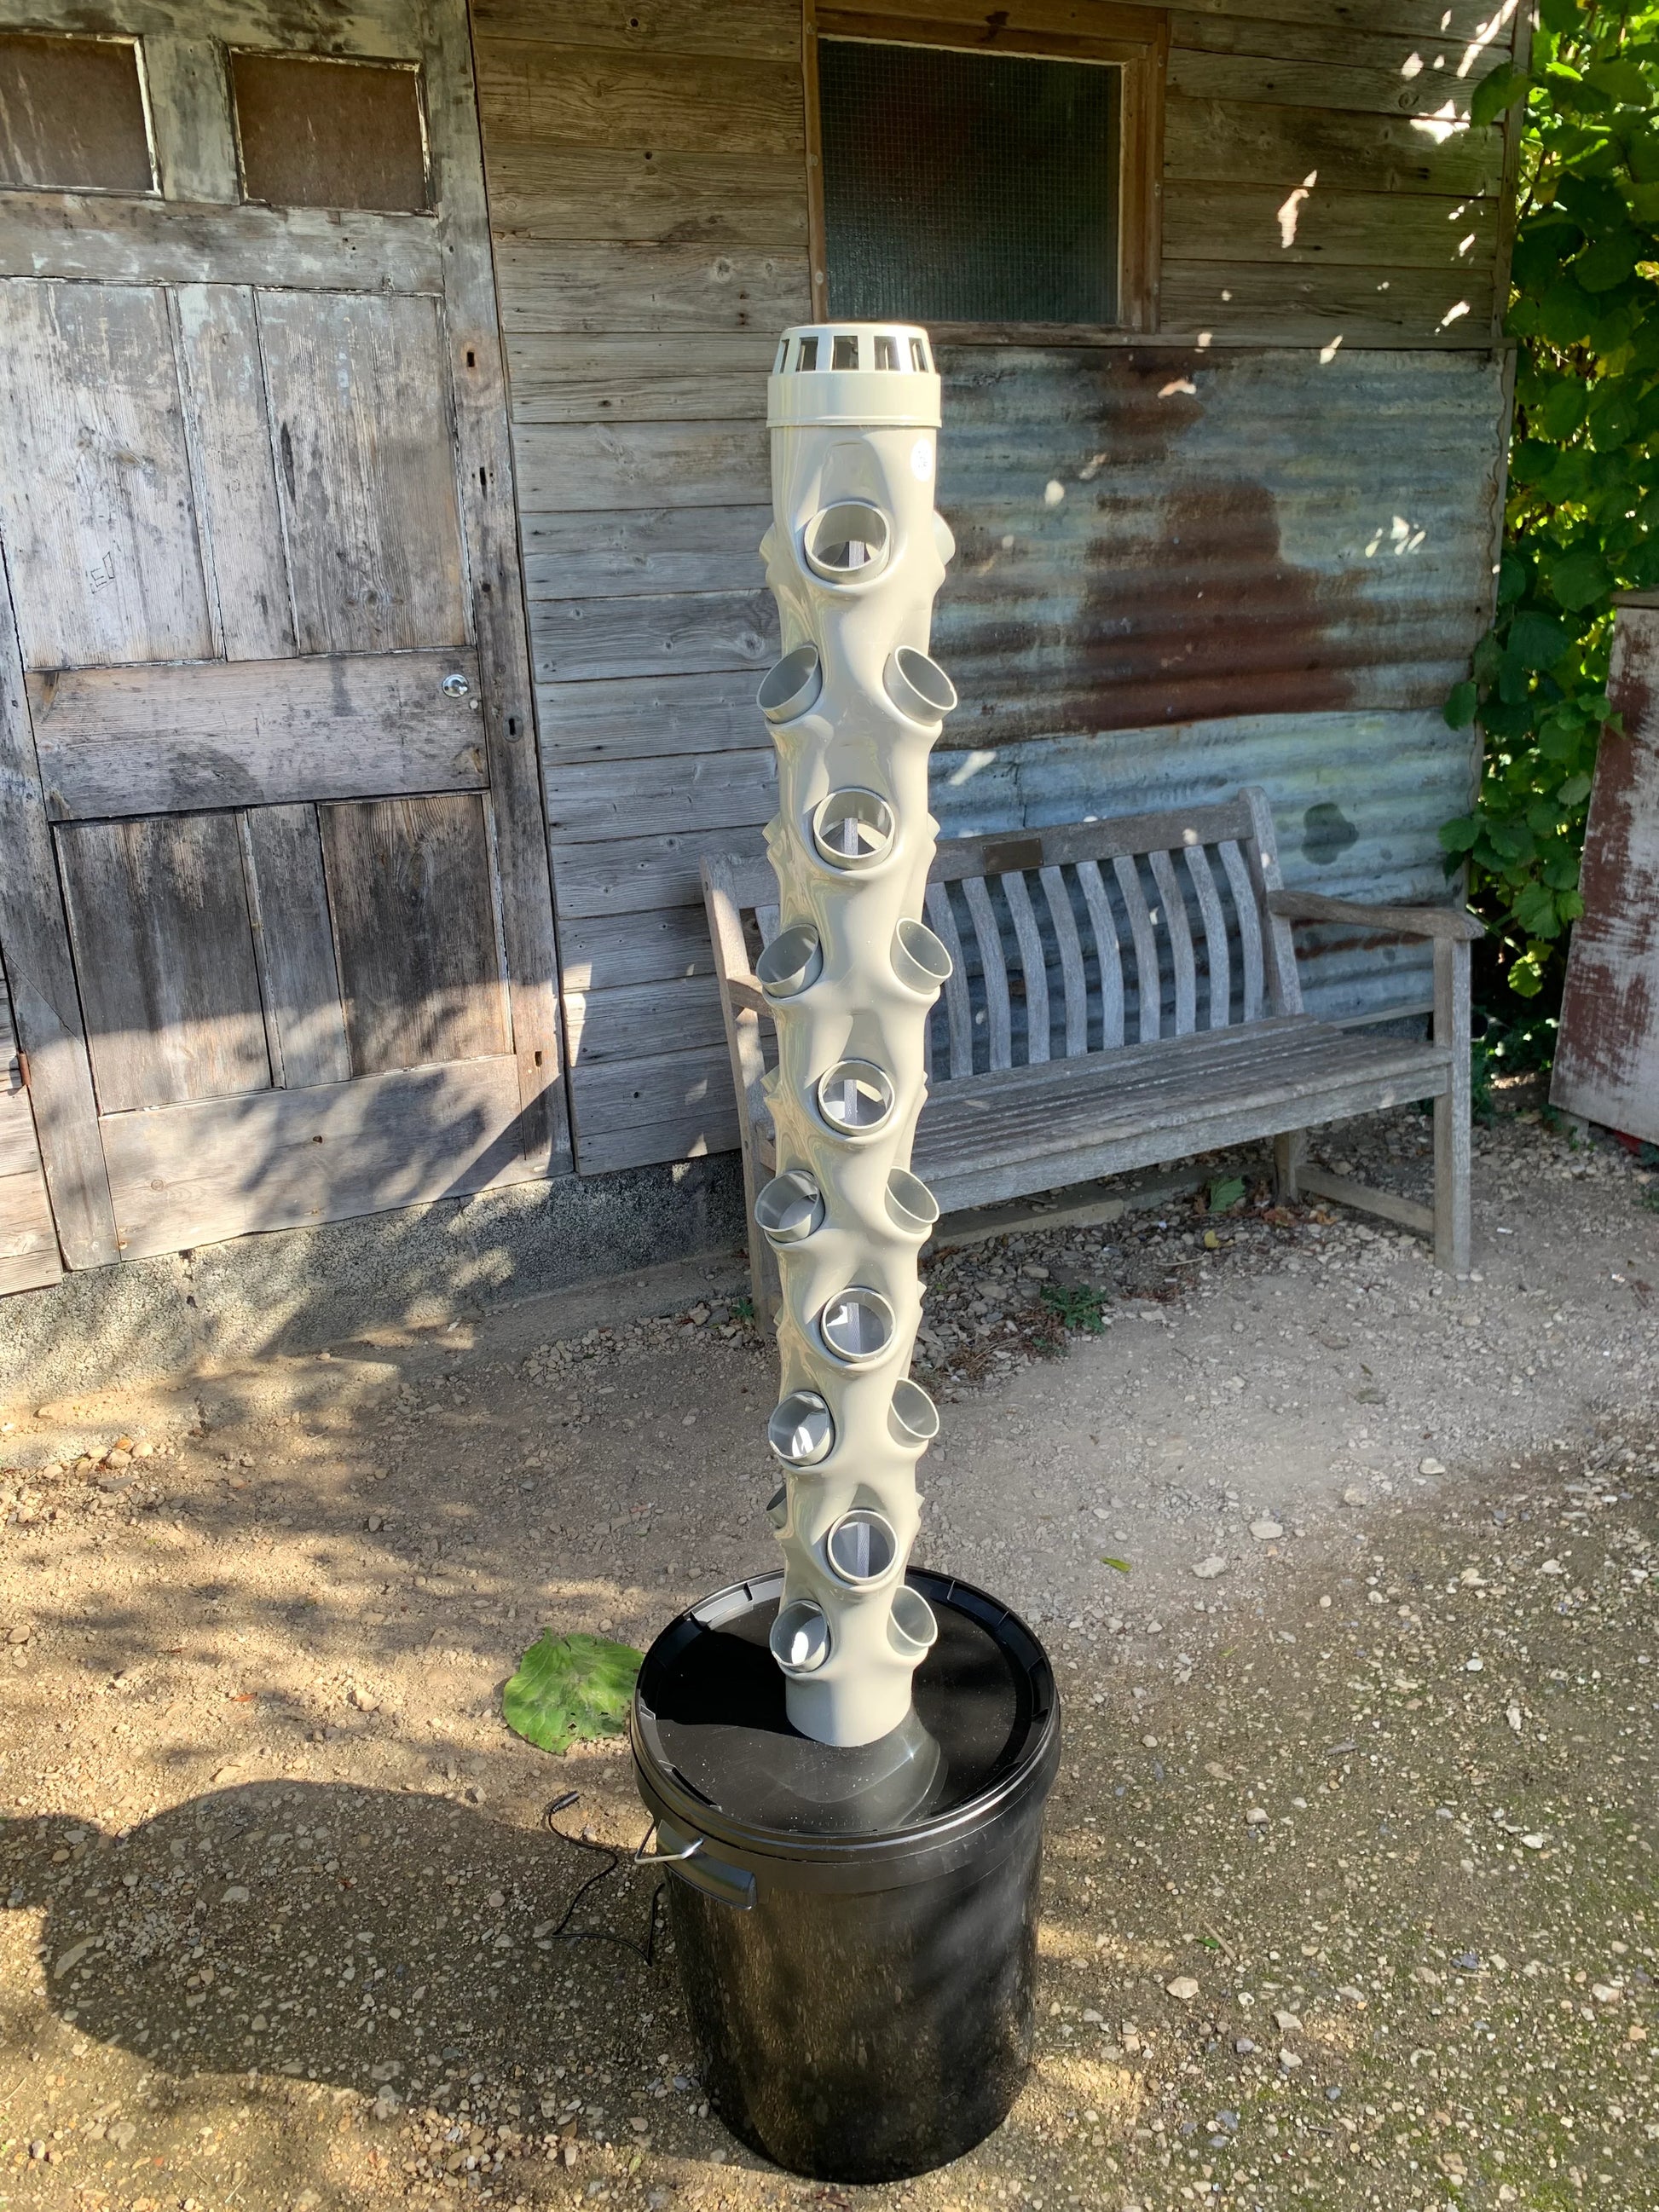 Vertical Hydroponic Tower Self-Watering Growing System (for 30 plants, choice of colours) Vertical Horizon Hydroponics